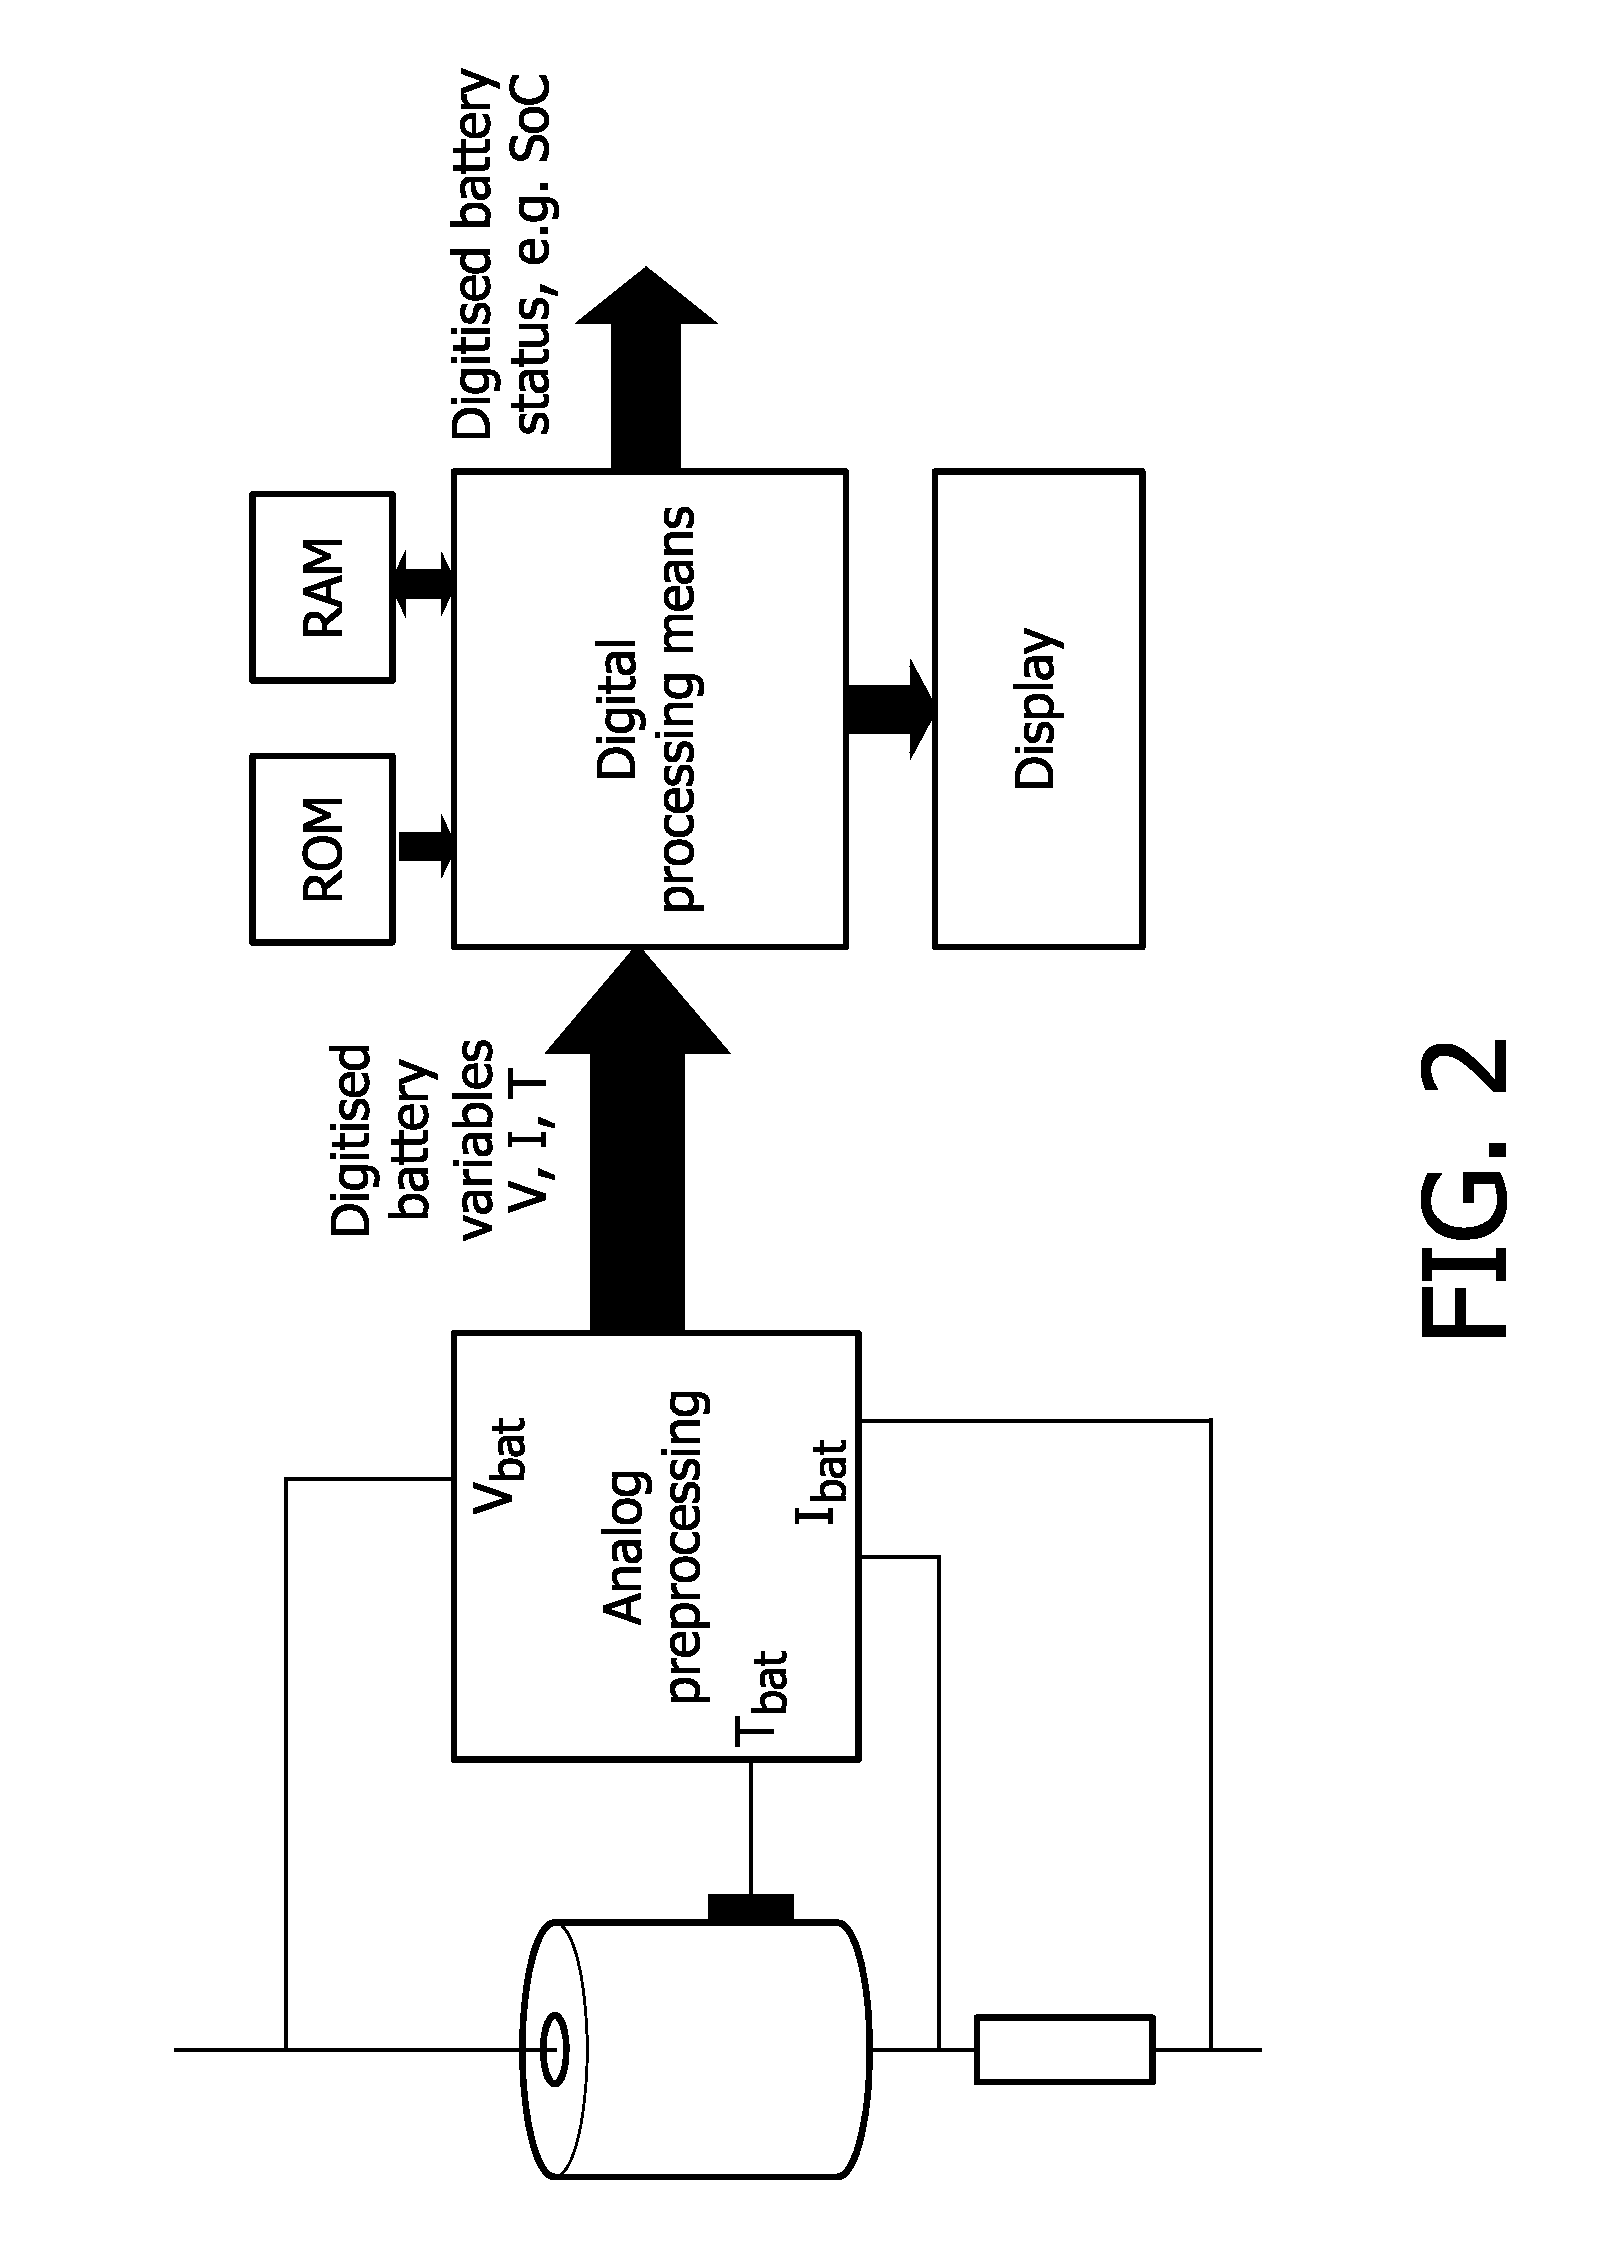 Apparatus and method for determination of the state-of-charge of a battery when the battery is not in equilibrium